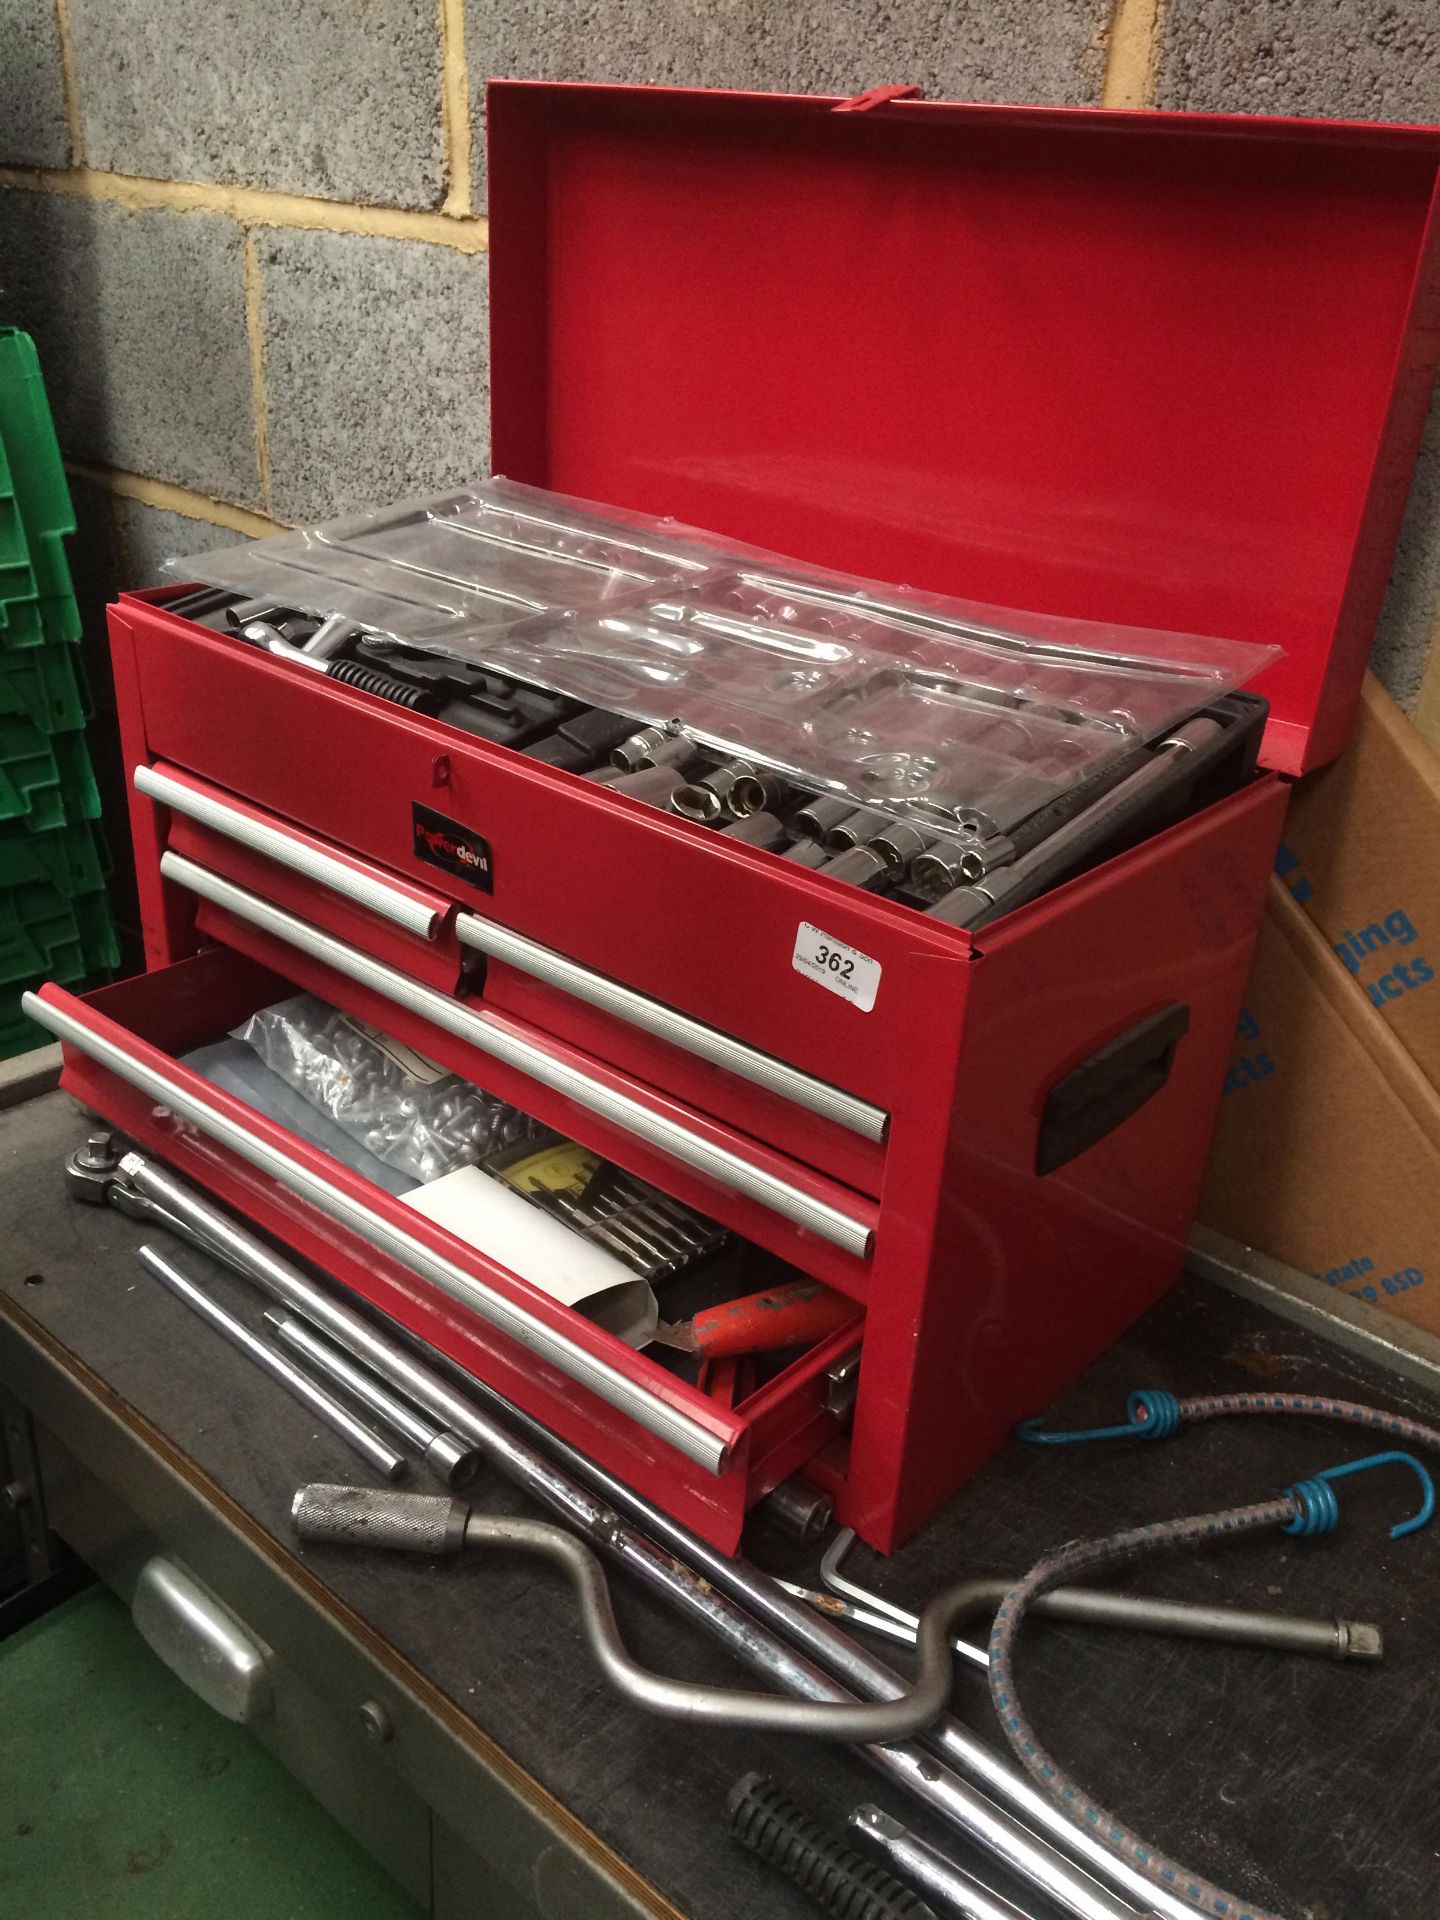 A Power Devil red metal tool box with contents - socket set, spanners, screwdrivers,